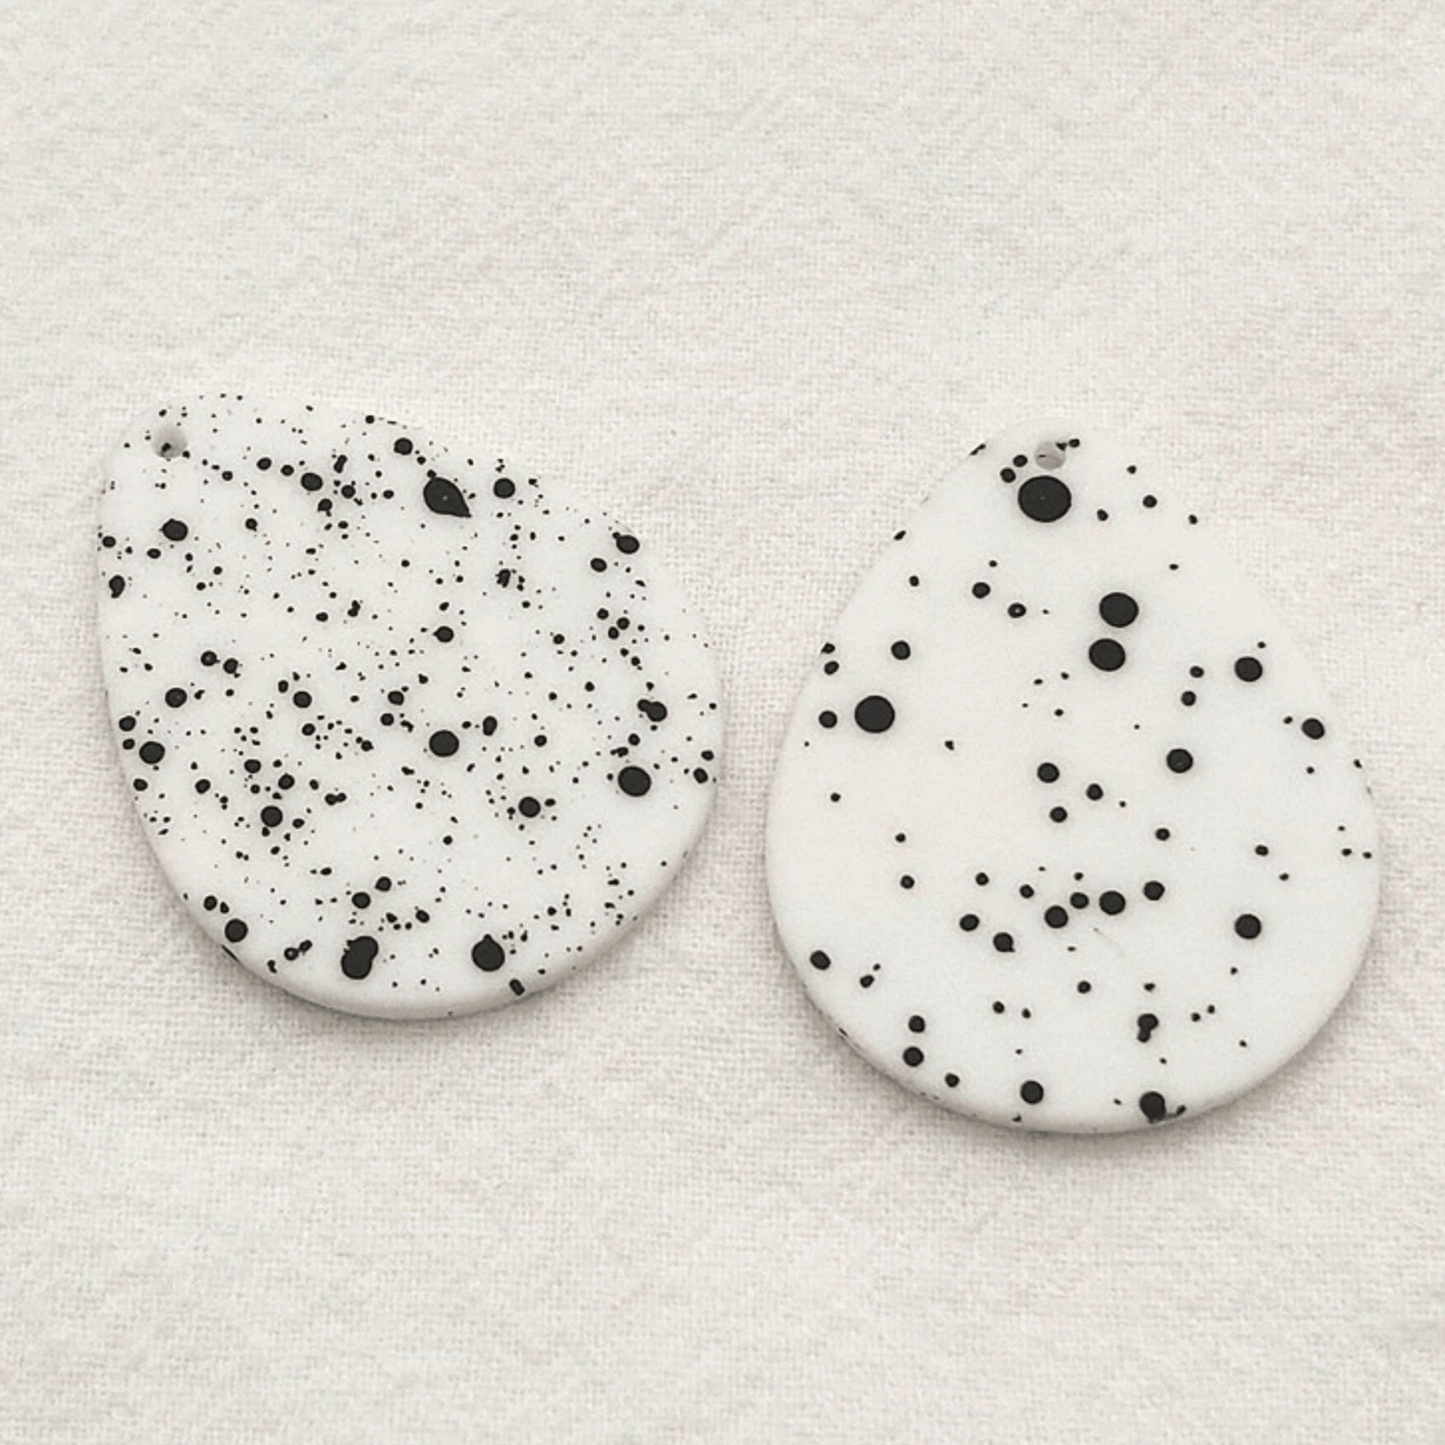 Sundaylace Creations & Bling Resin Gems White with black paint dots 31*39mm Black and White Paint dots Large Fat Teardrops *Reversible*, one hole sew on, Resin Gems